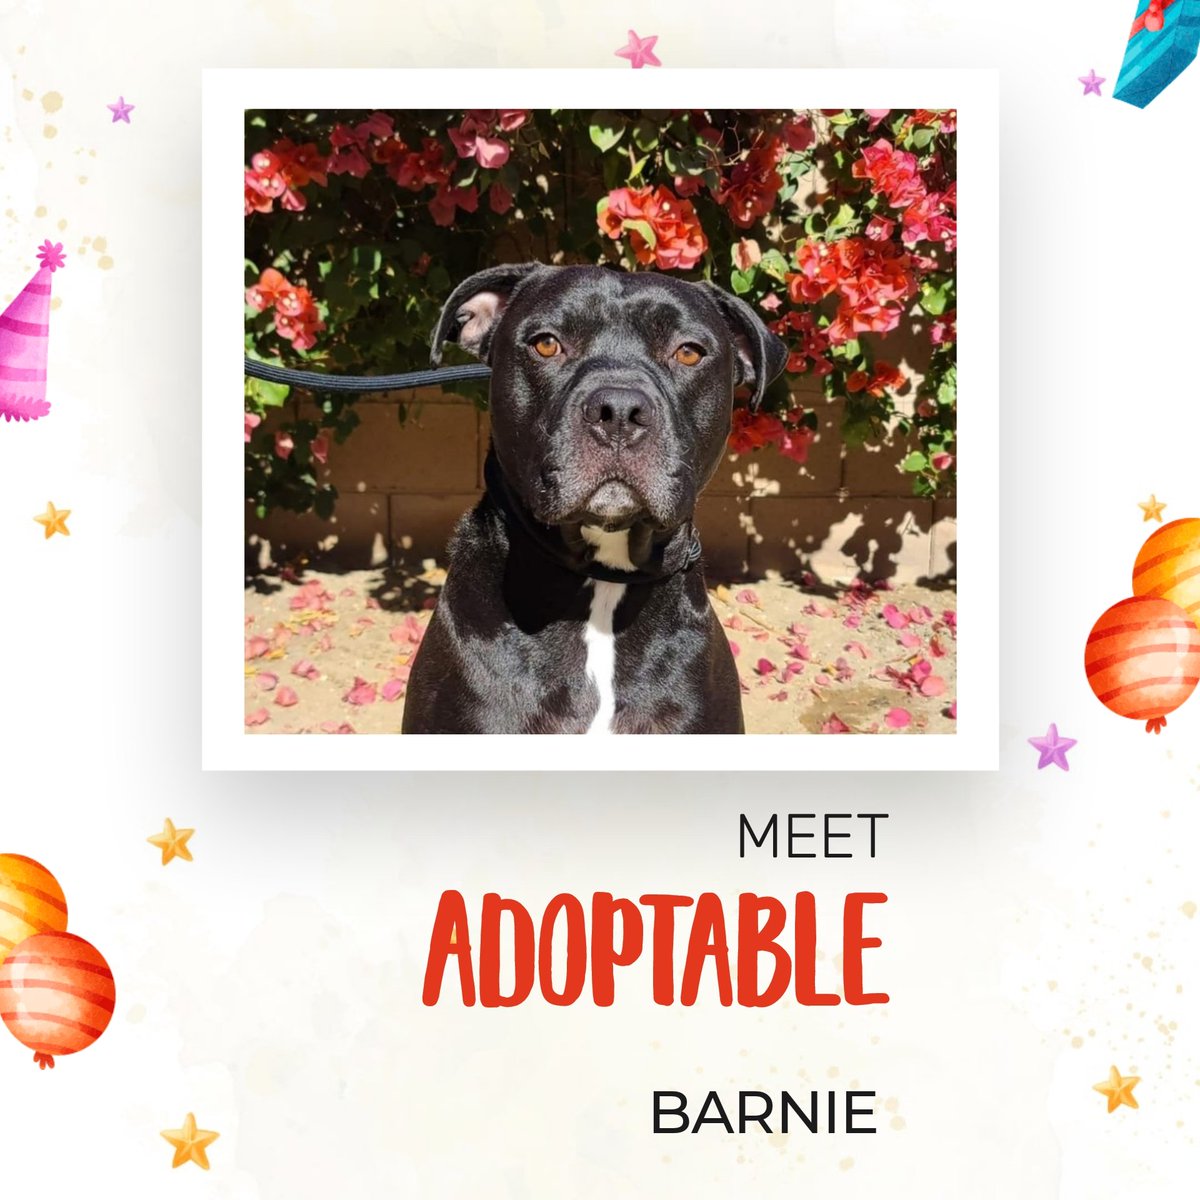 MEET BARNIE, a friendly, boy about 80lbs and 2-3 years old.  He is UTD on shots, fixed and chipped and ready to go home with you today!  To apply for BARNIE, visit lolr.org.

#adoptdontshop #adopt #adoptthisdog #rescue #rescuedog #rescuedismyfavoritebreed #doggo